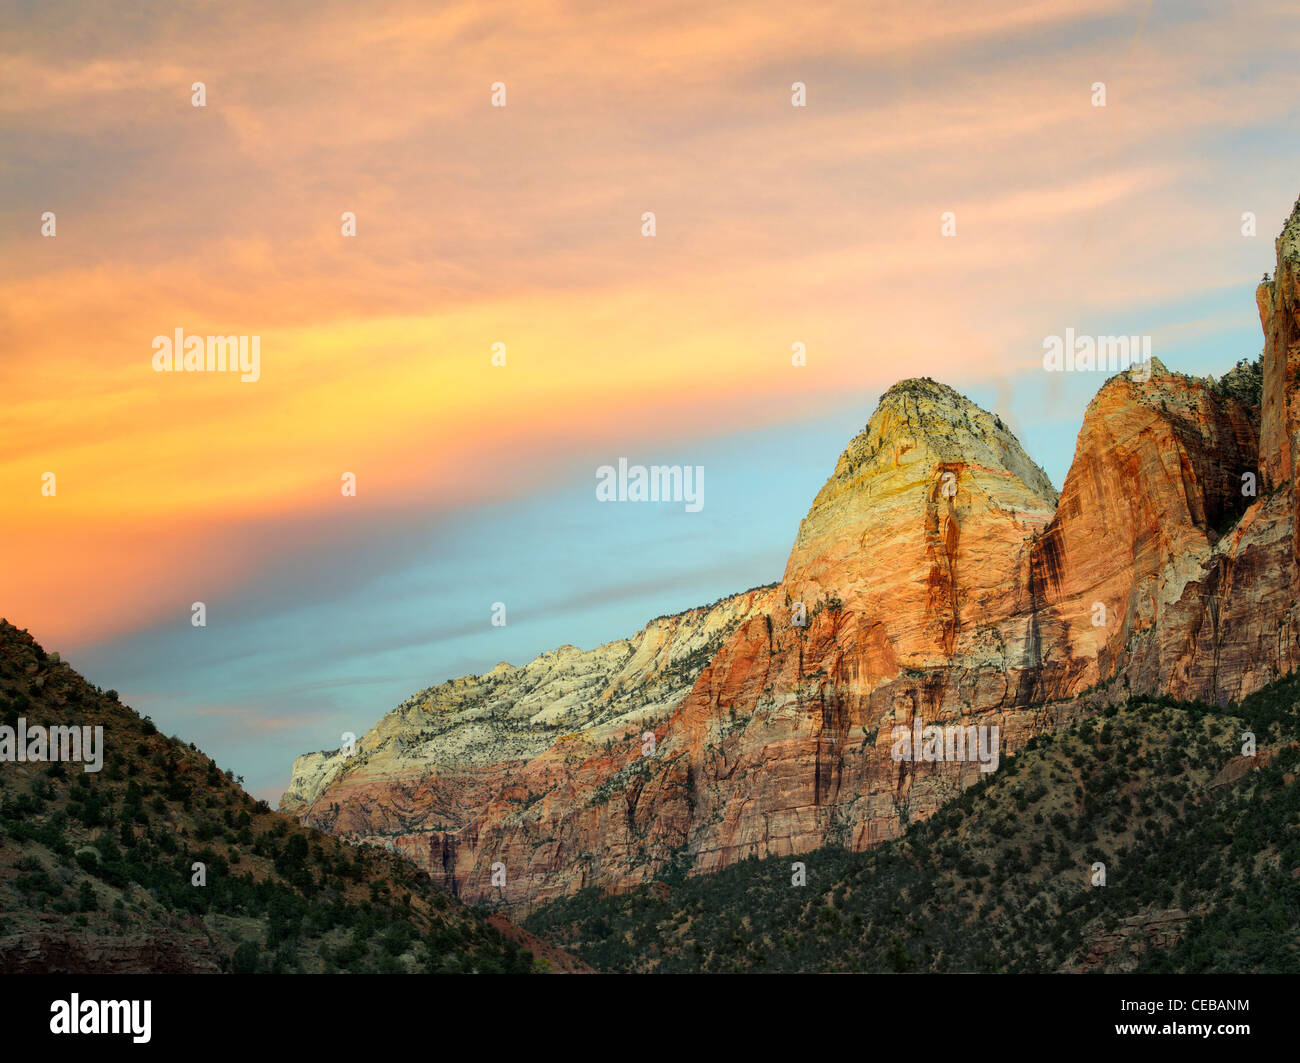 Sunset clouds at Zion National Park, Utah Stock Photo